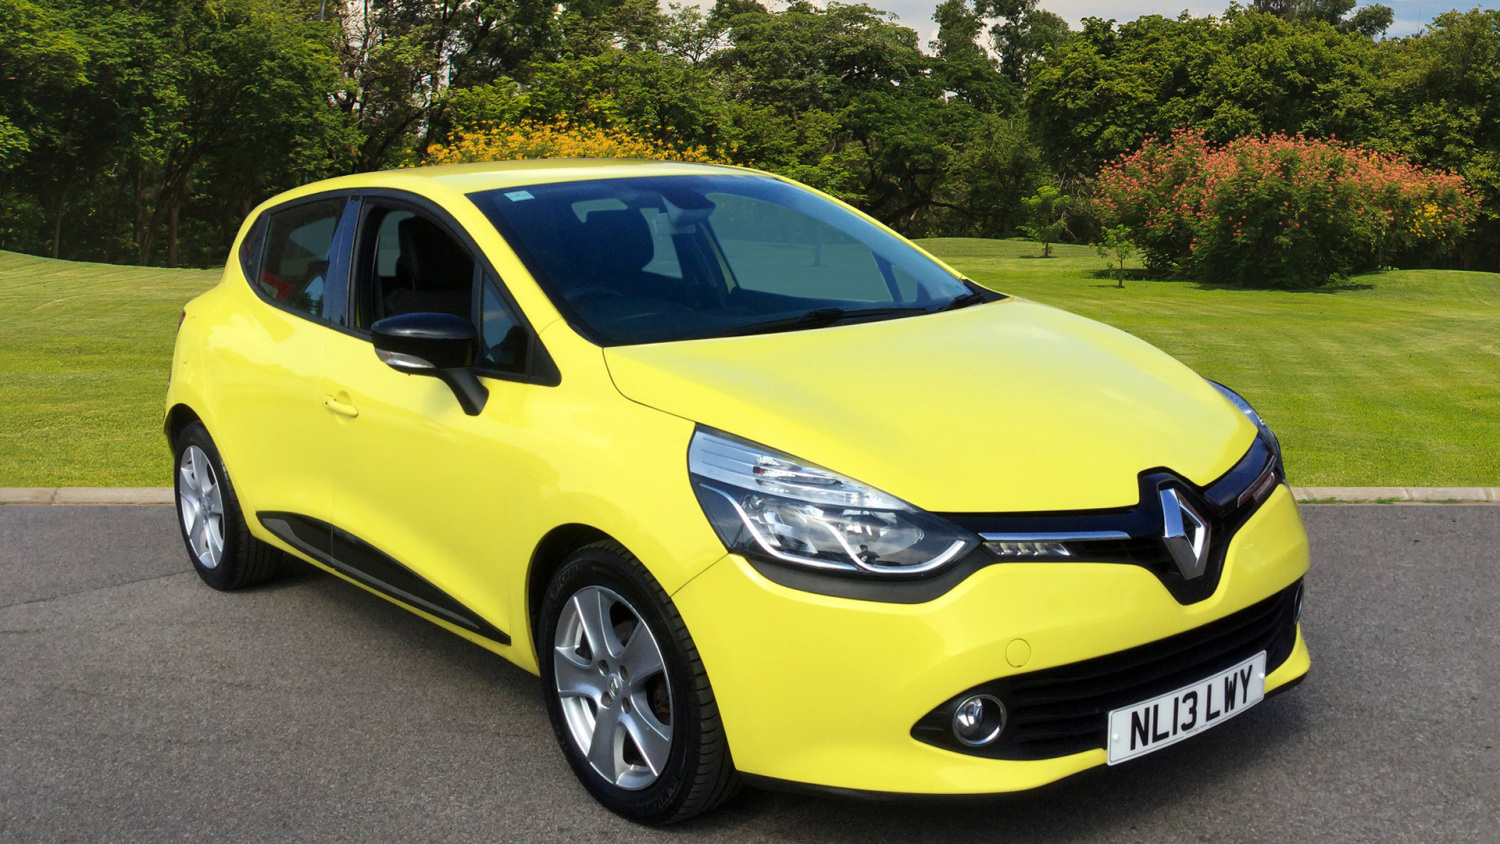 Used Renault Clio 1.5 Dci 90 Dynamique Medianav Energy 5Dr ...